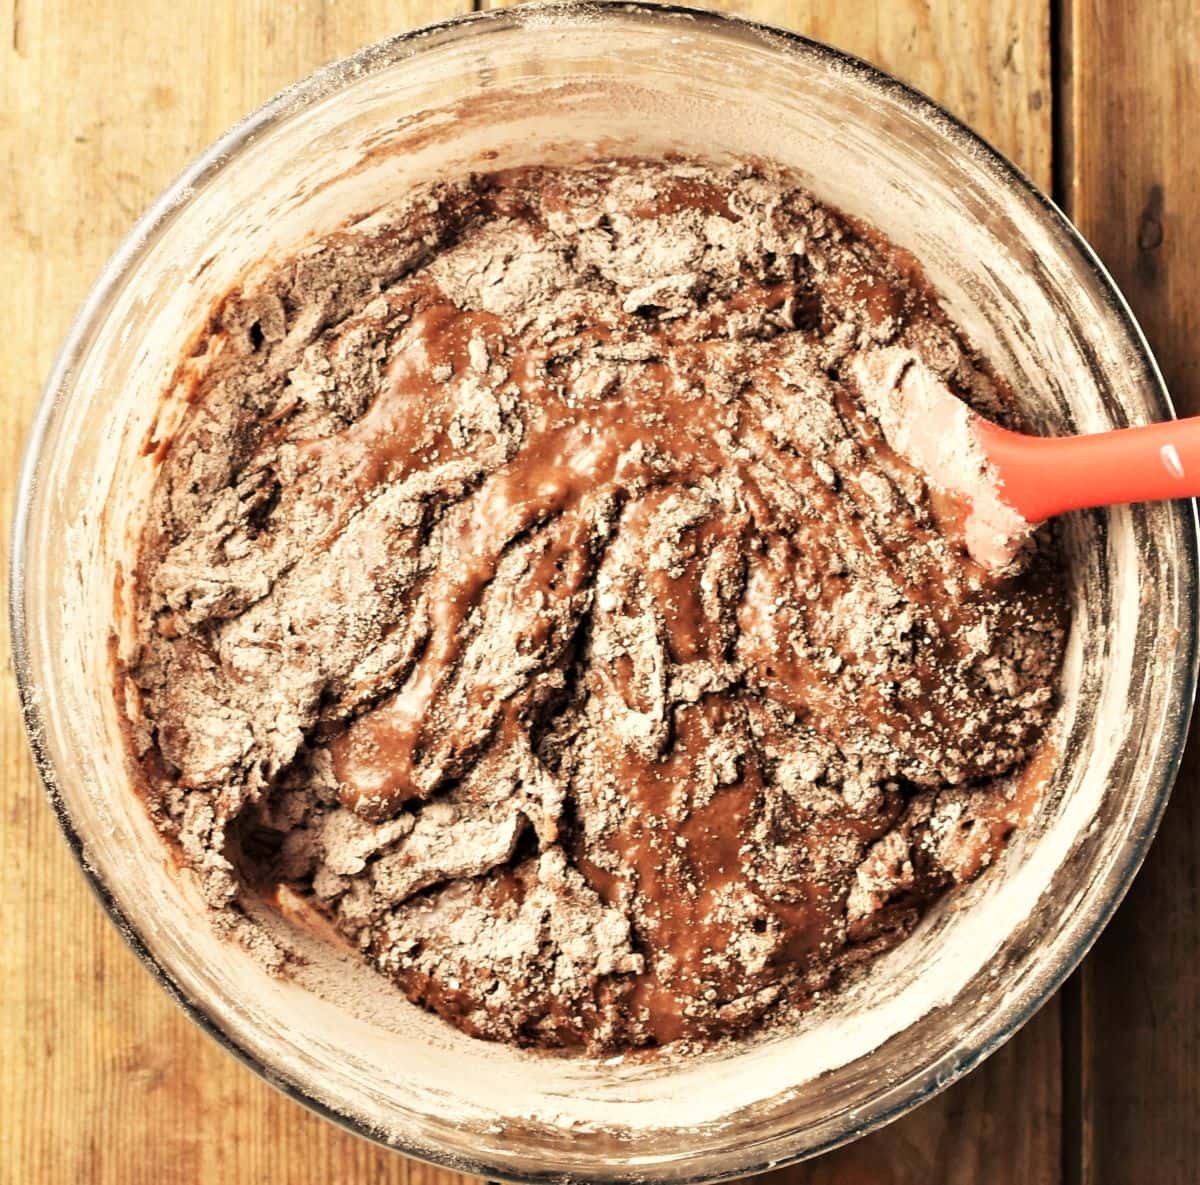 Chocolate cake batter with some flour not quite mixed in.